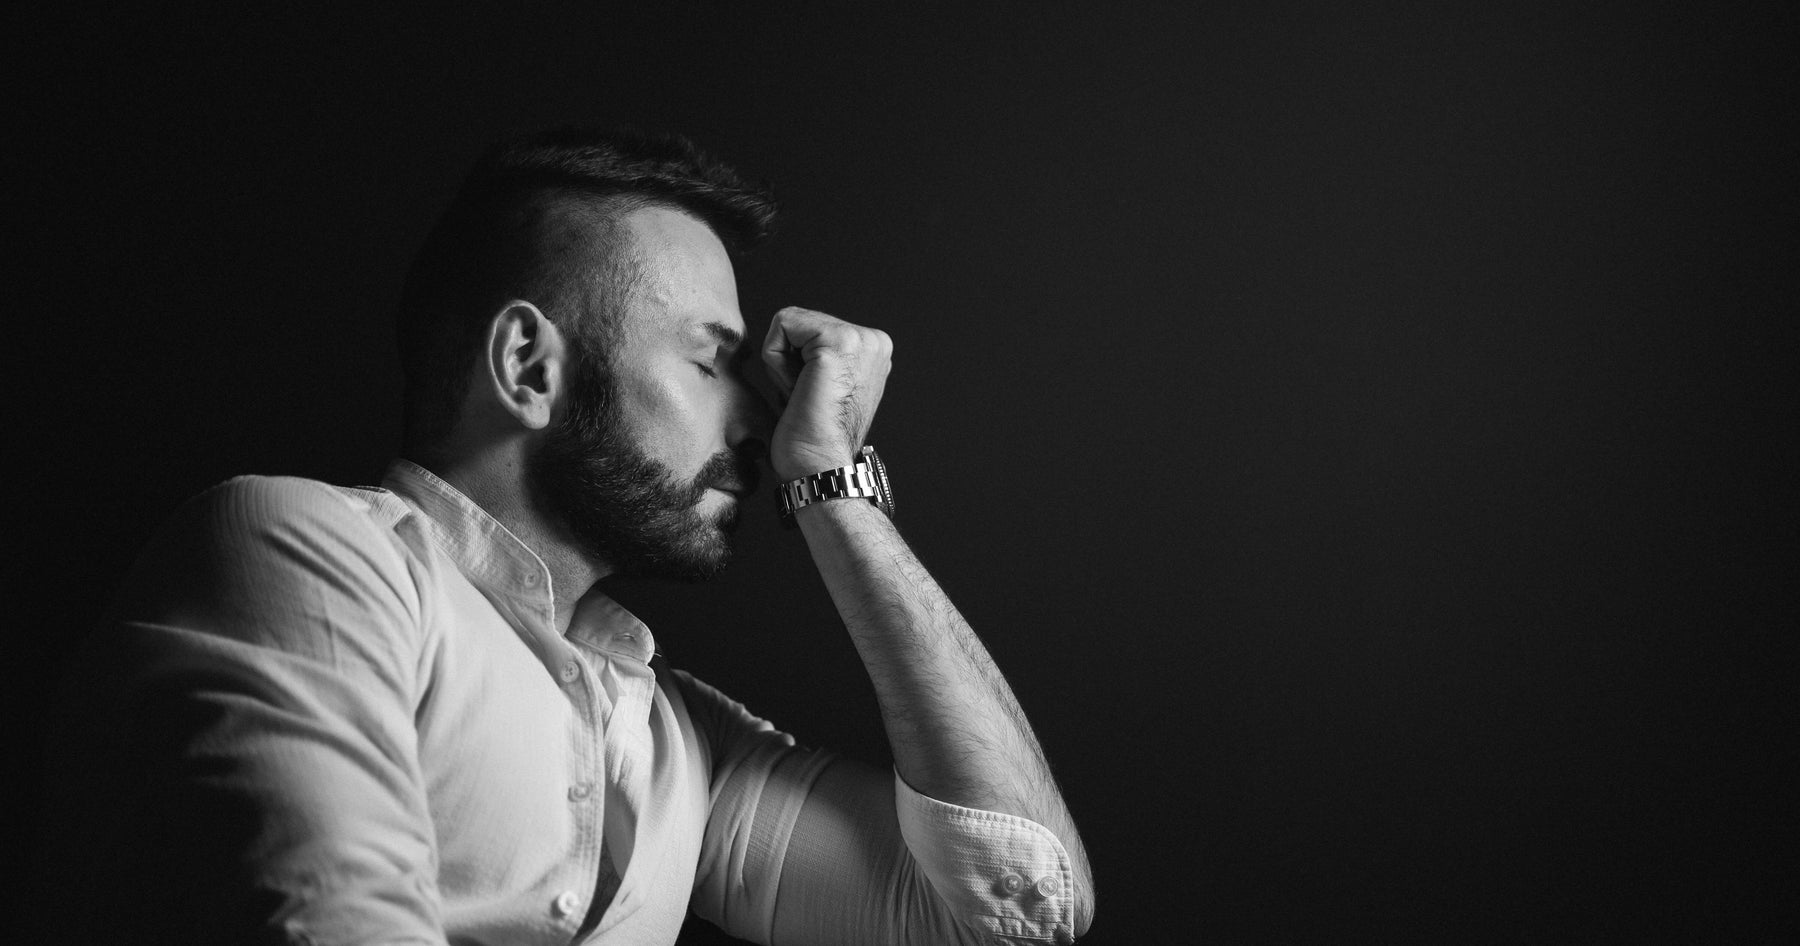 Simone Andreoli in profile, wearing a white collared shirt, smelling his wrist. Black and white with black background.